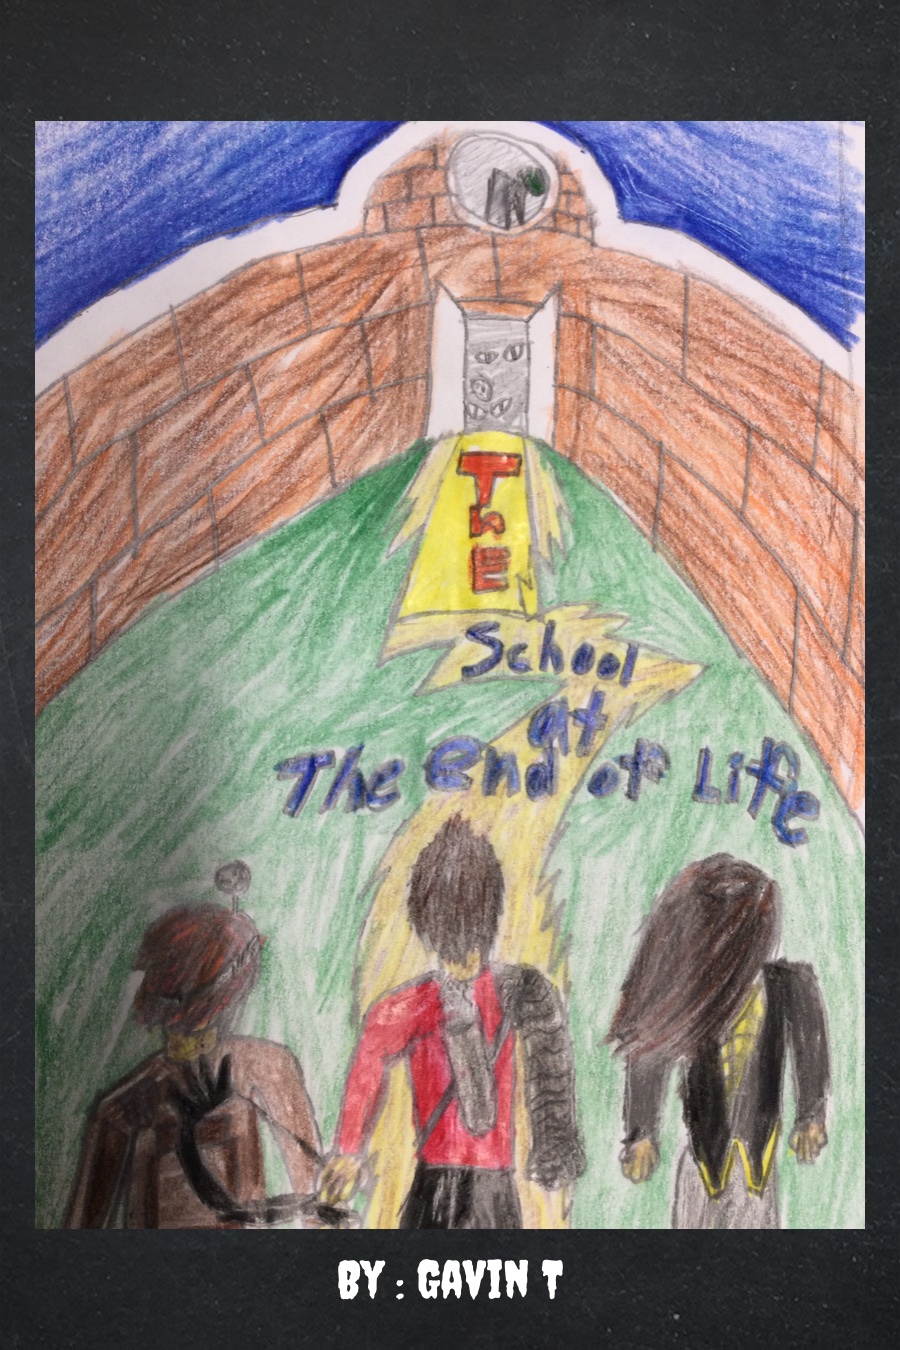 The School at the End of Life by Gavin T